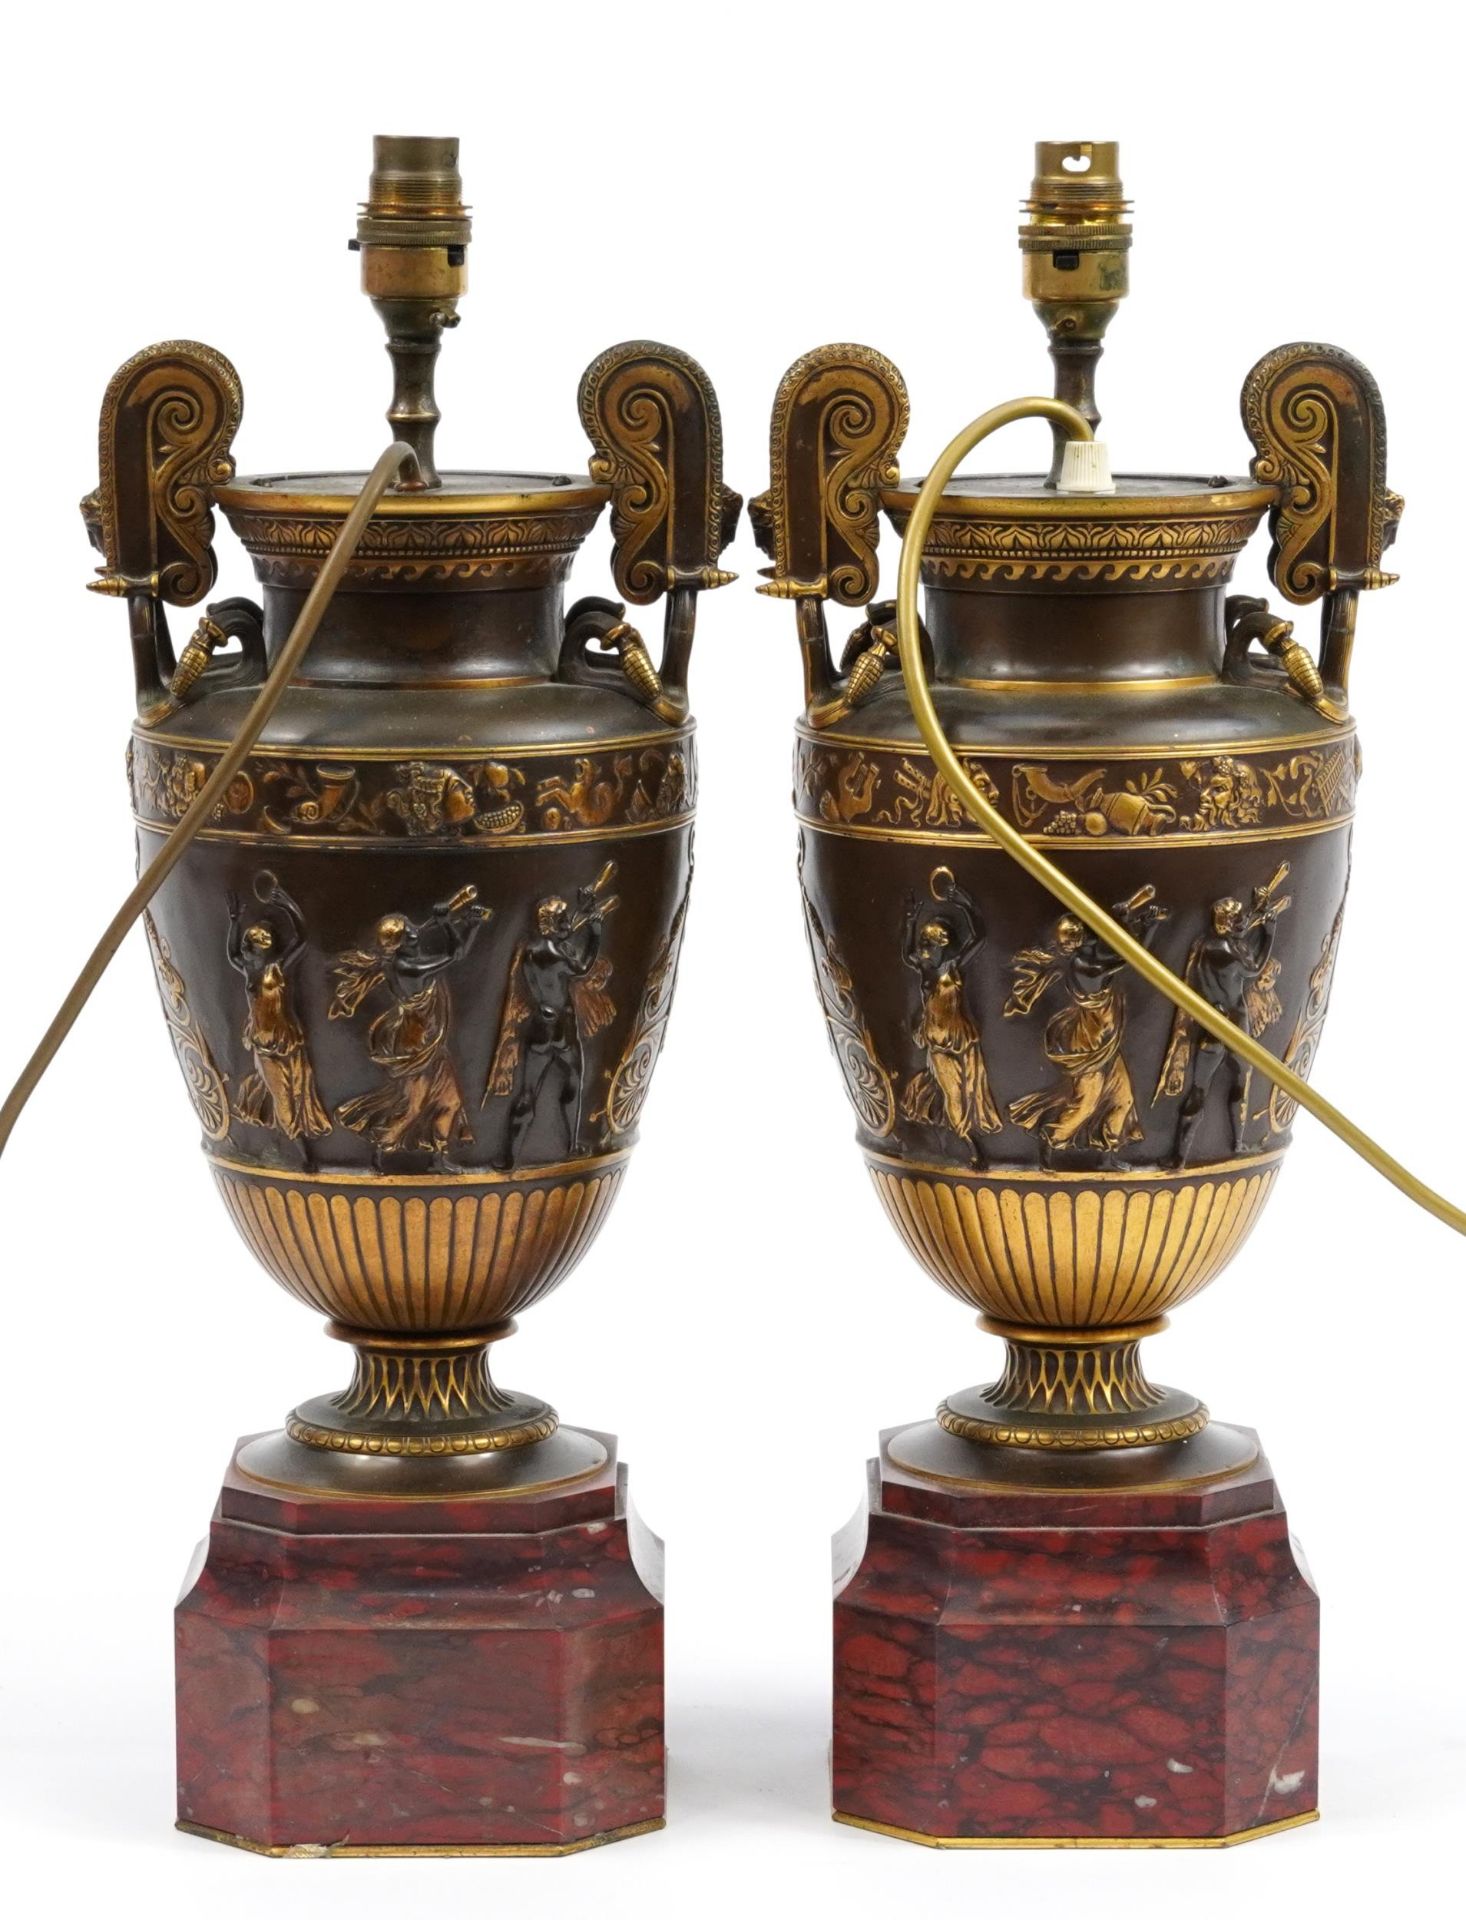 Pair of 19th century style classical patinated bronze vase urn table lamps with twin handles - Image 2 of 3